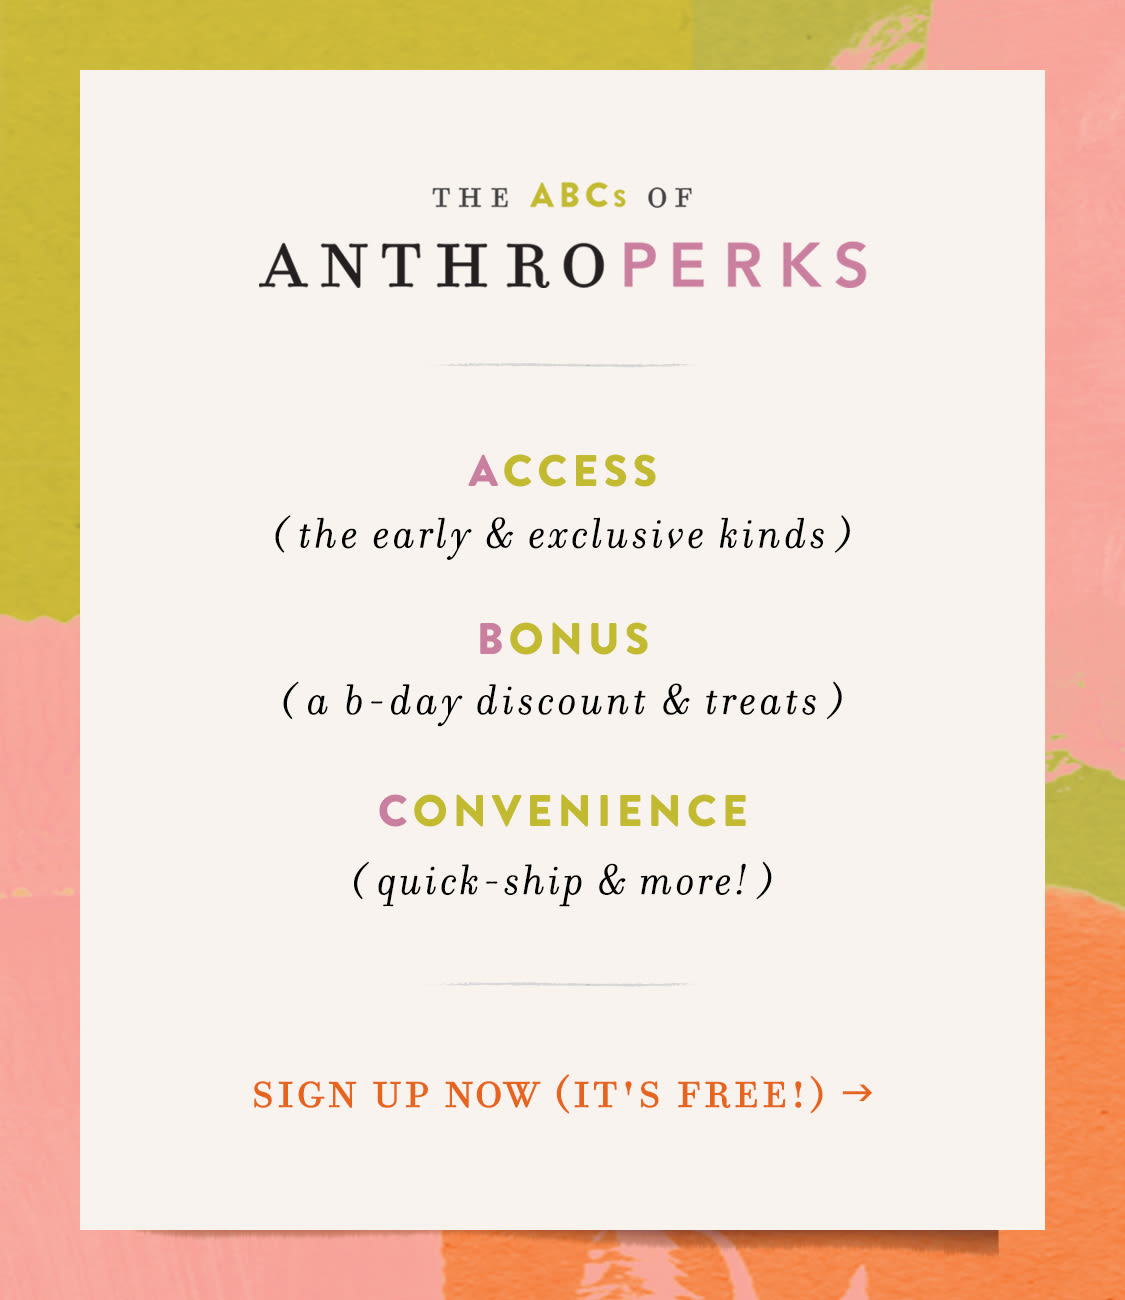 the ABCs of AnthroPerks: Access (the early & exclusive kinds) Bonus (a birthday discount & more surprises) Convenience (full order history, receipt-free returns & more)  sign up now (it's fast & free!)